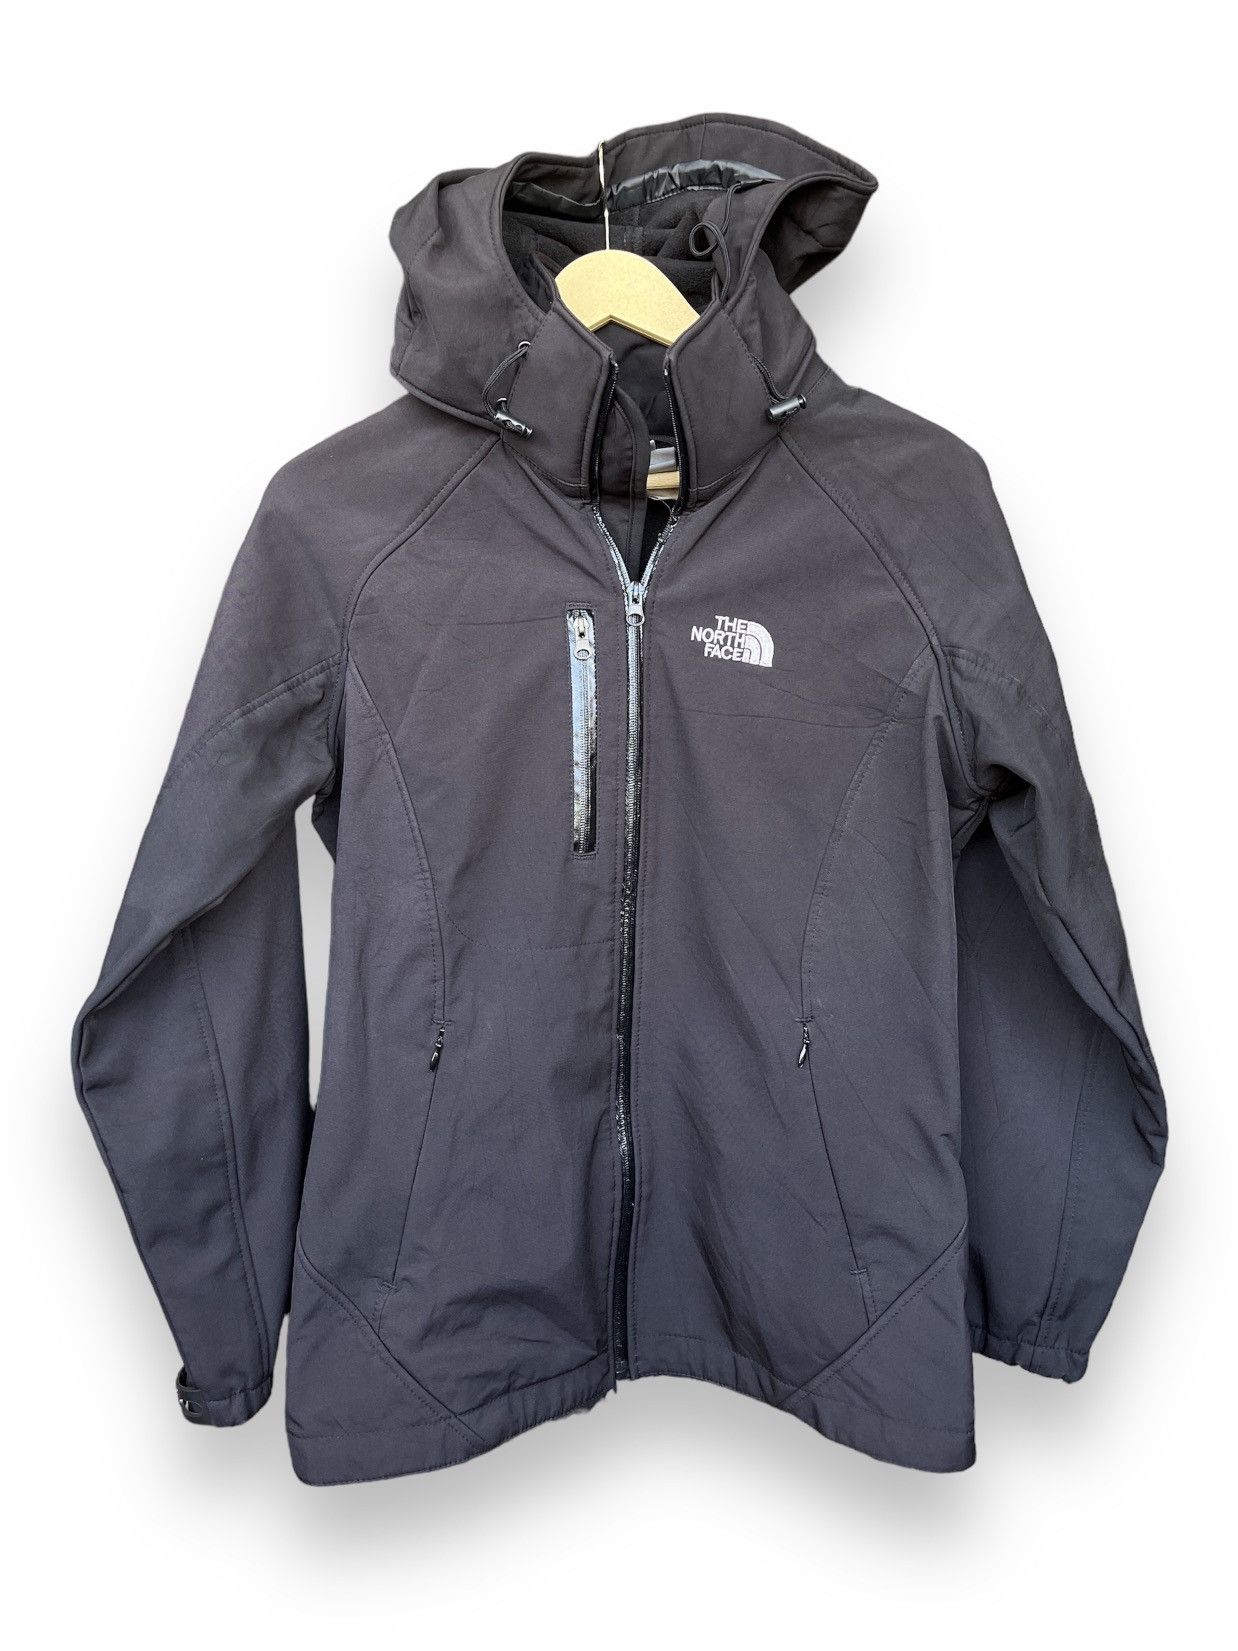 Outdoor Style Go Out! - The North Face X Goretex Summit Series Jacket - 21